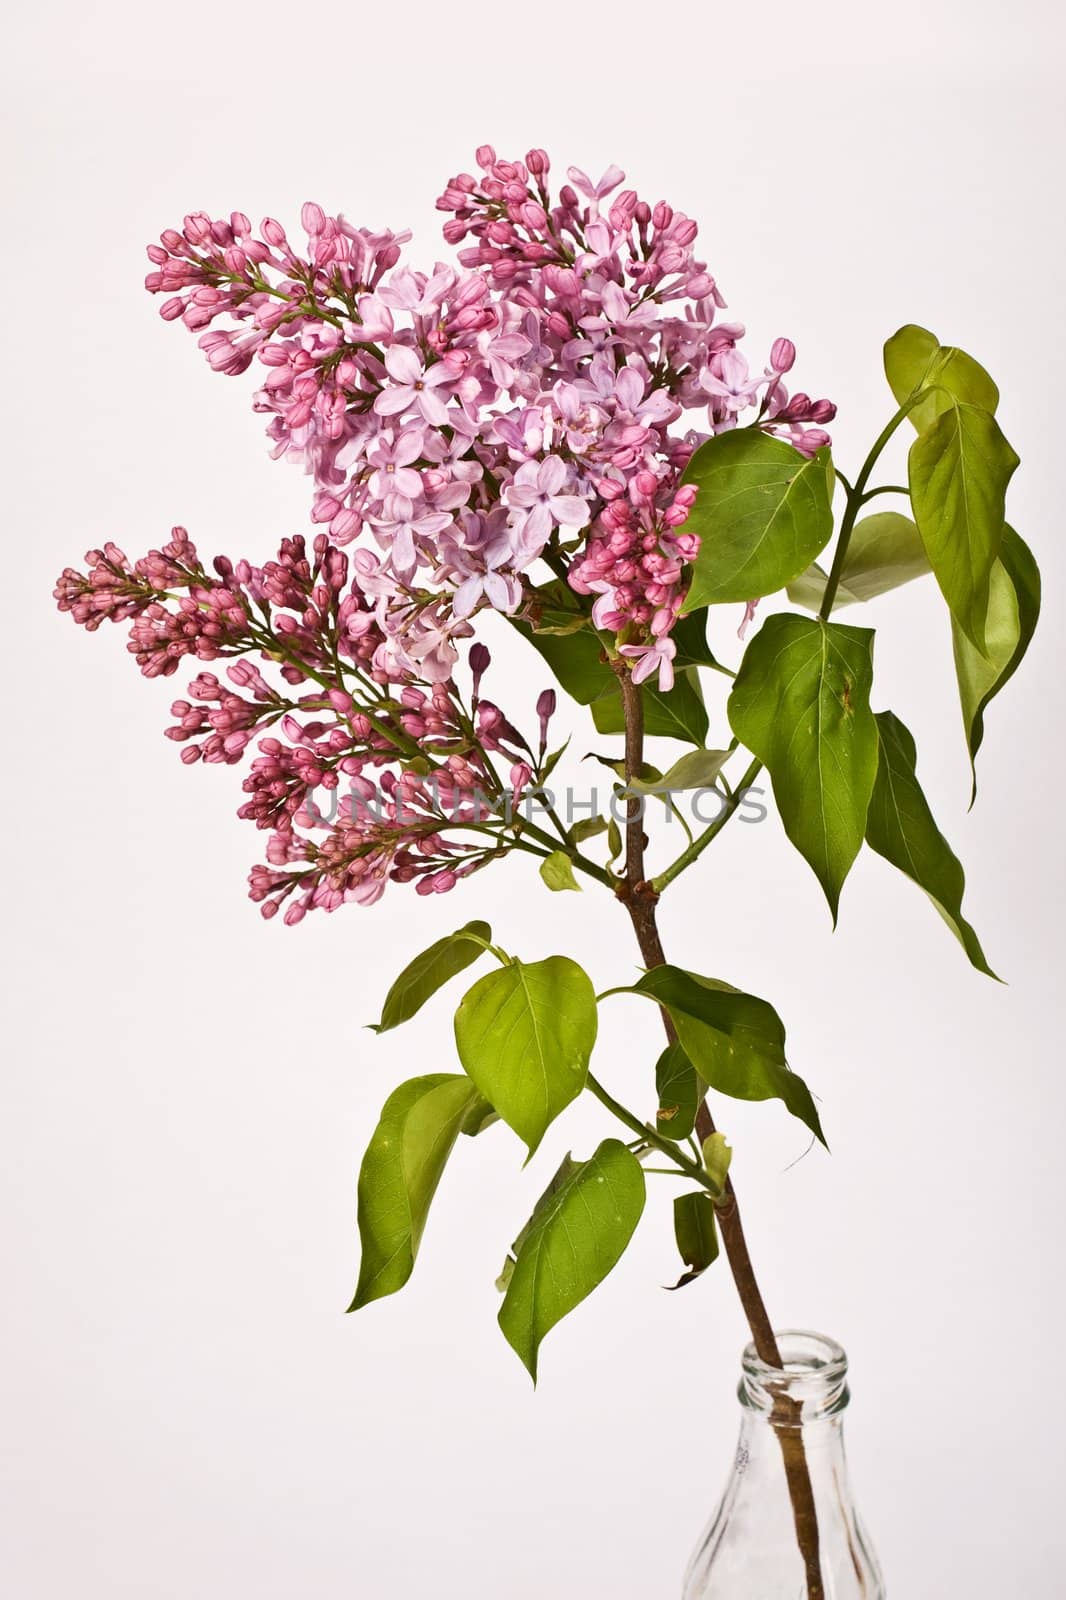 Purple lilac branch on the bowl over light background